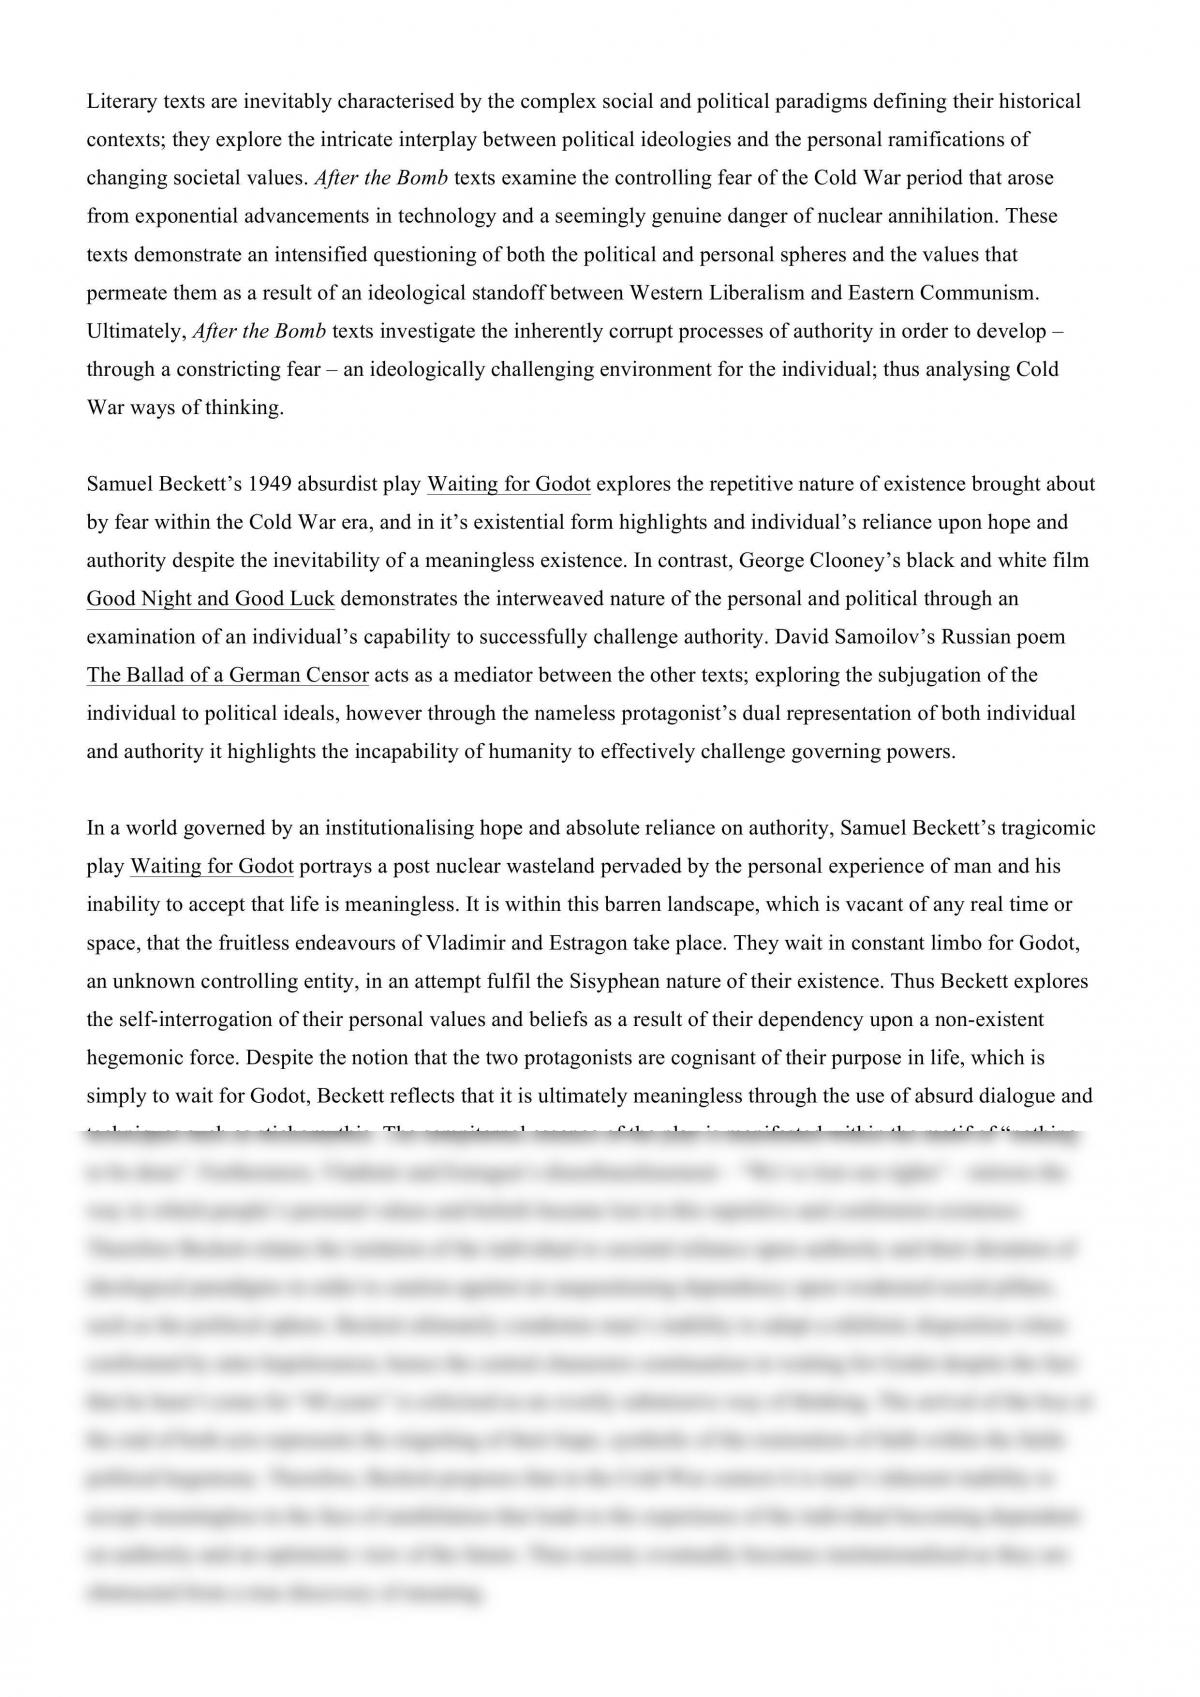 Full 'After the Bomb' Essay - Page 1